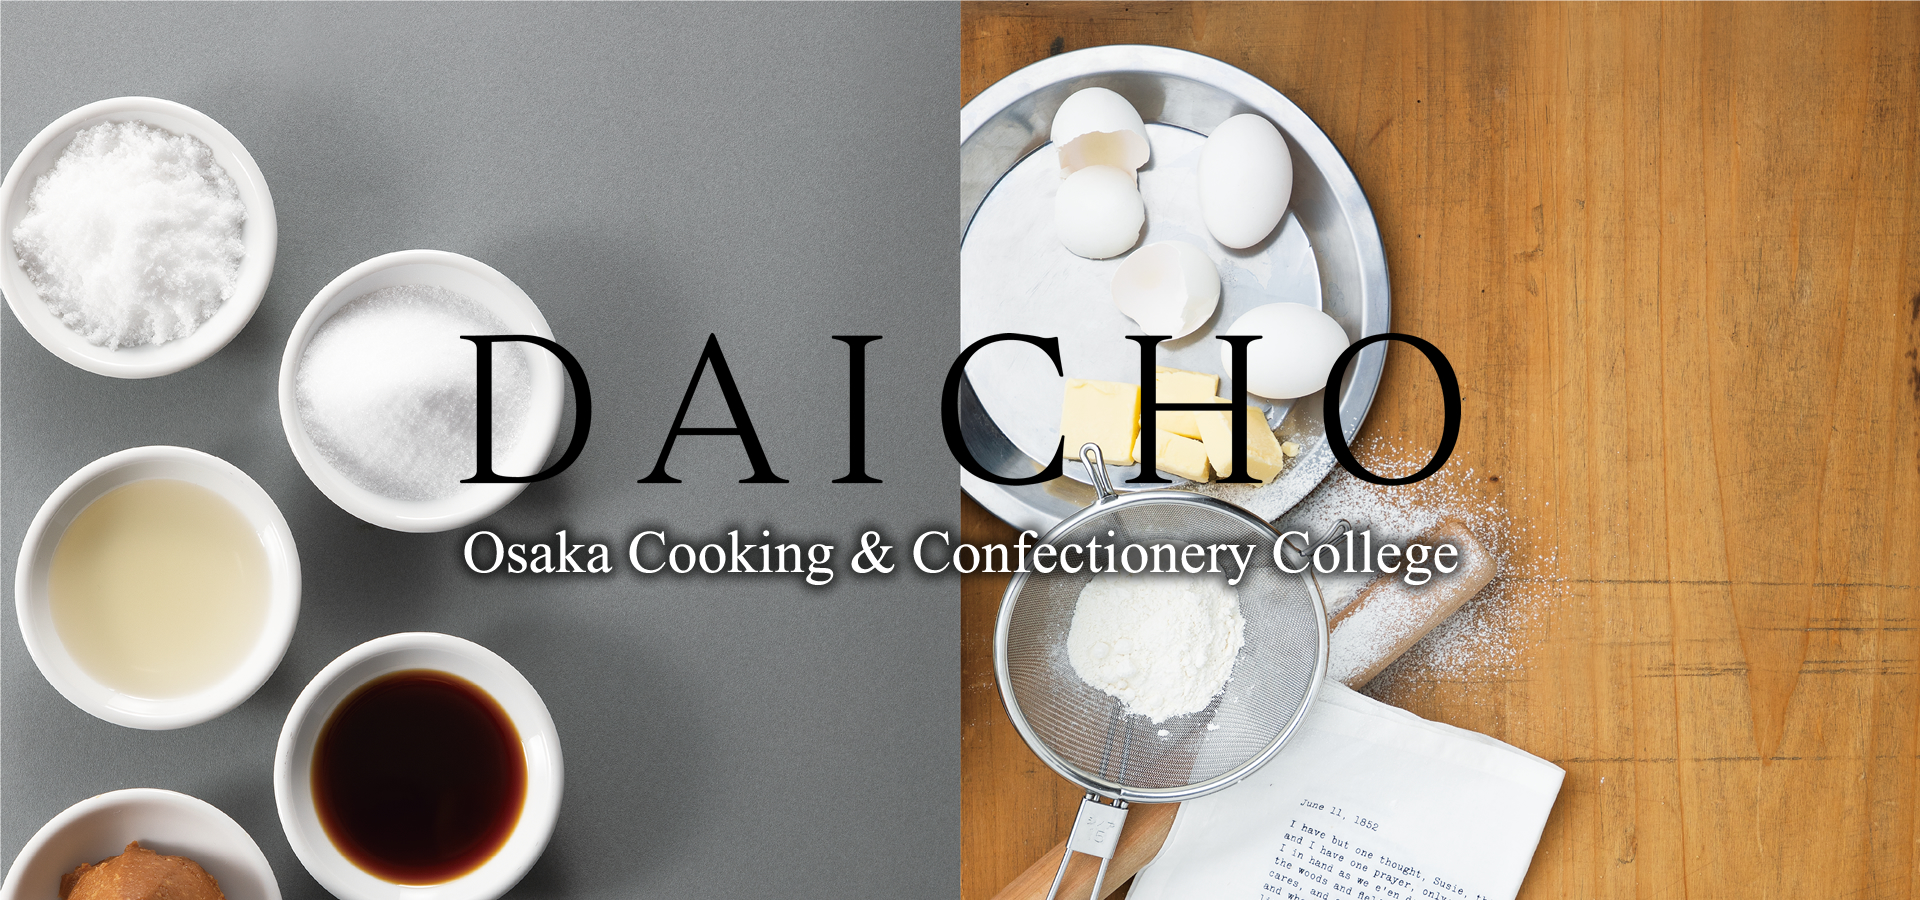 Osaka Cooking & Confectionery College